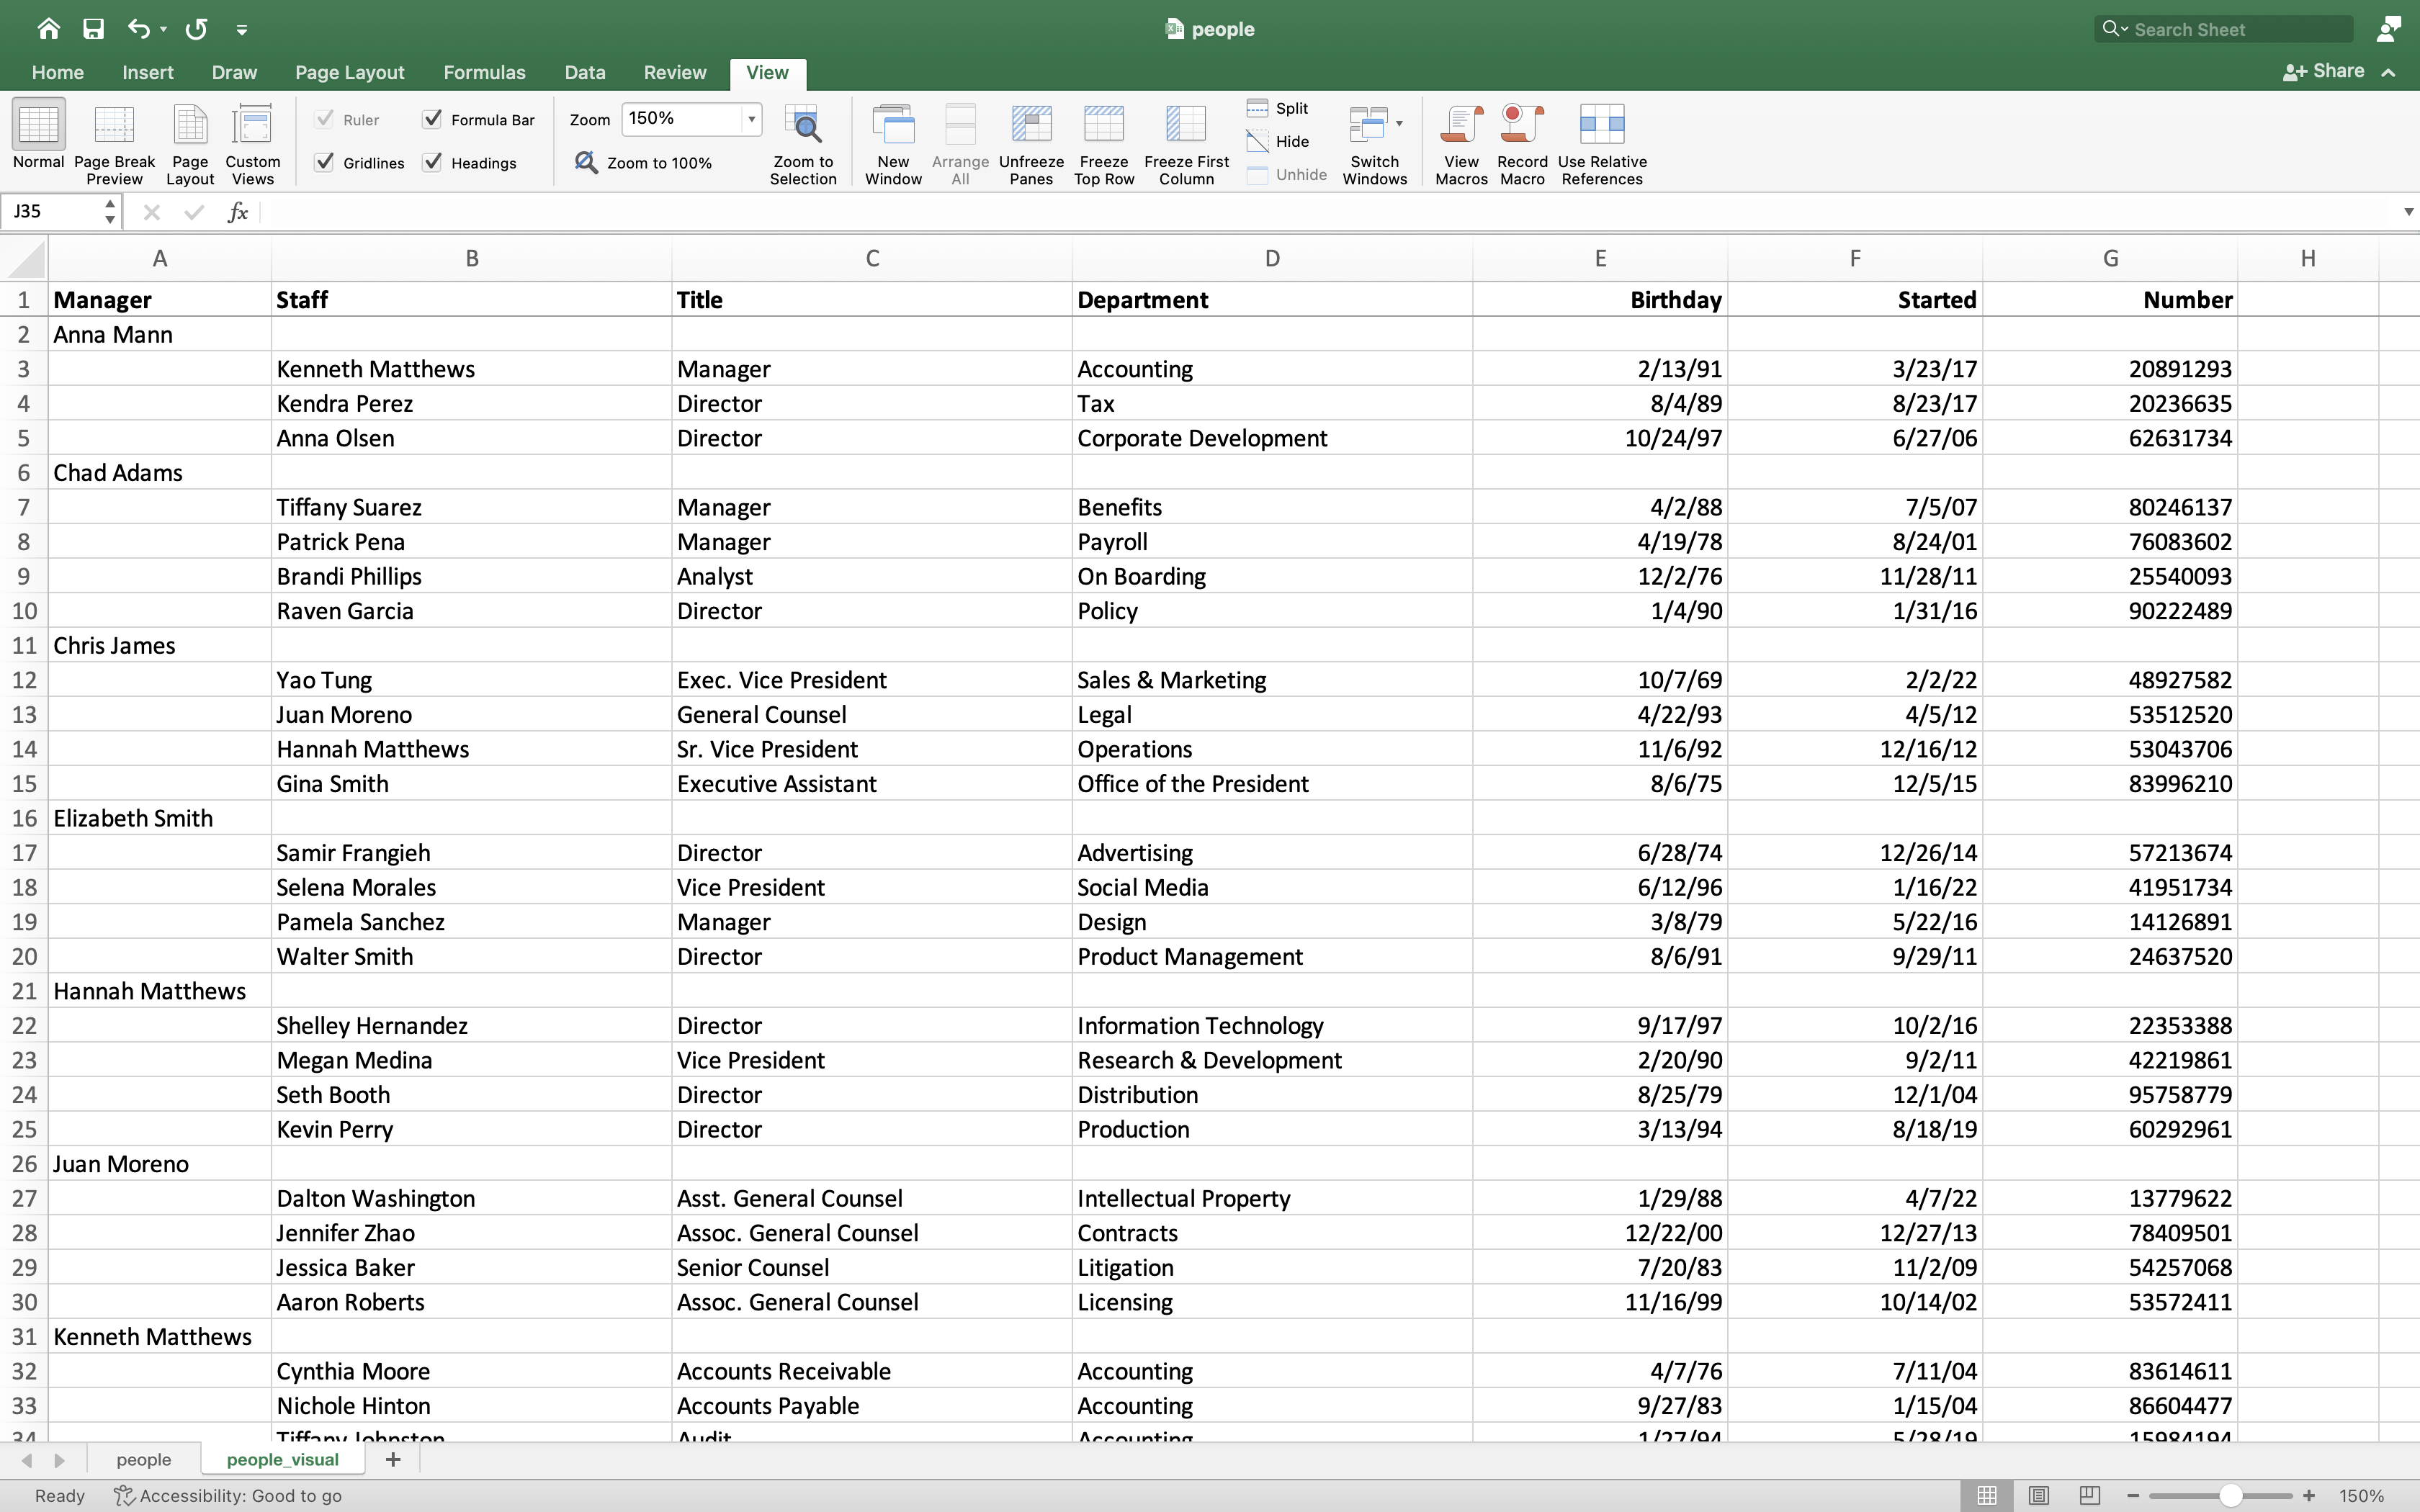 Excel organization data with visual grouping